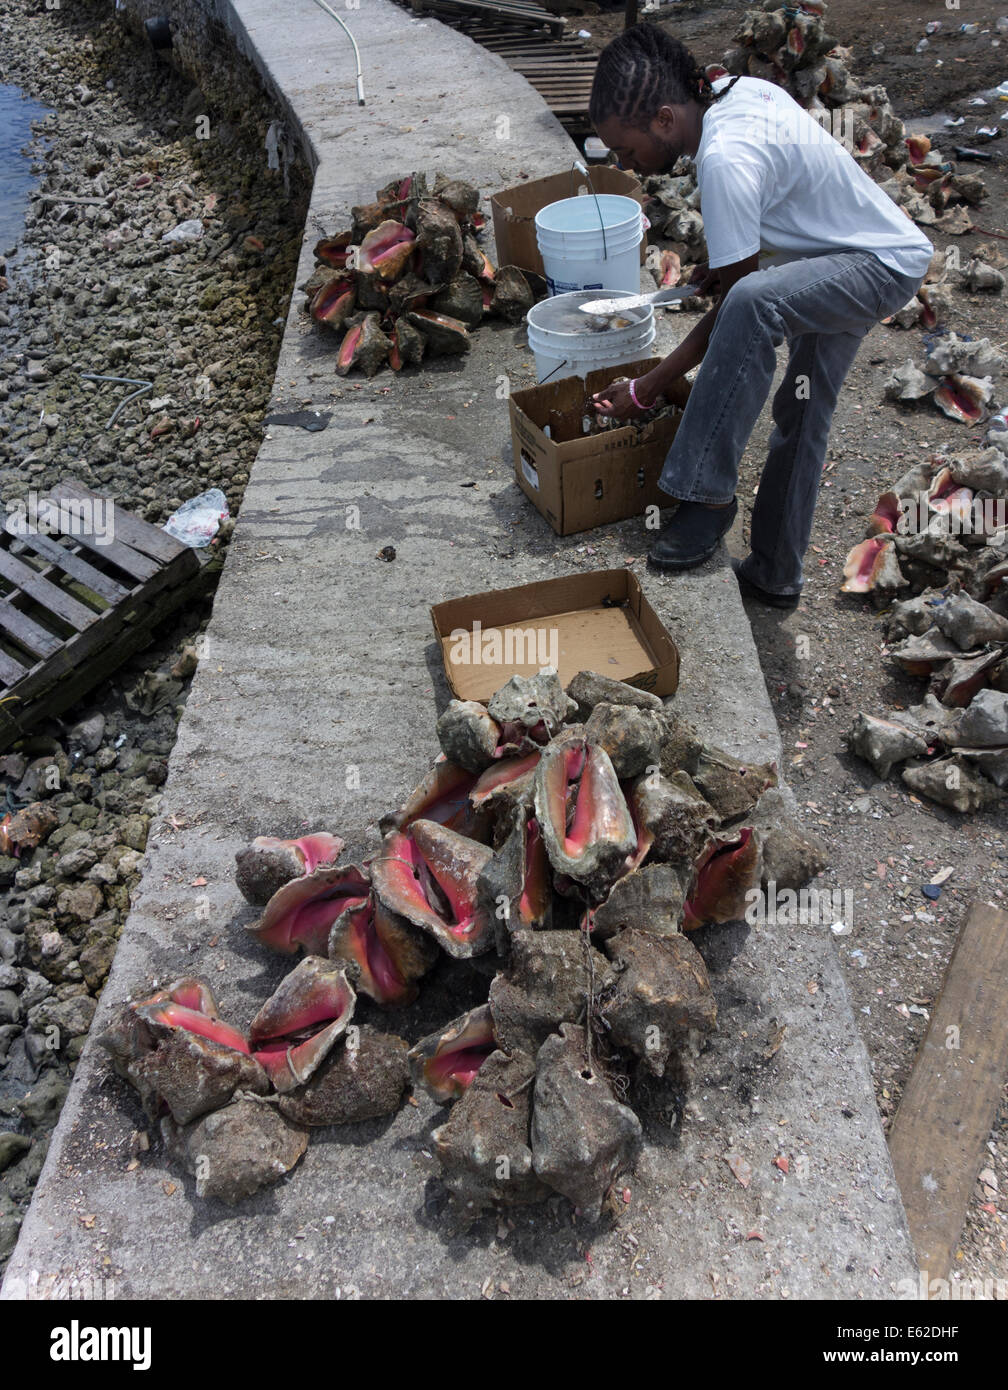 worker cutting live conches from their shells near restaurants, Nassau, Providence Island, The Bahamas Stock Photo